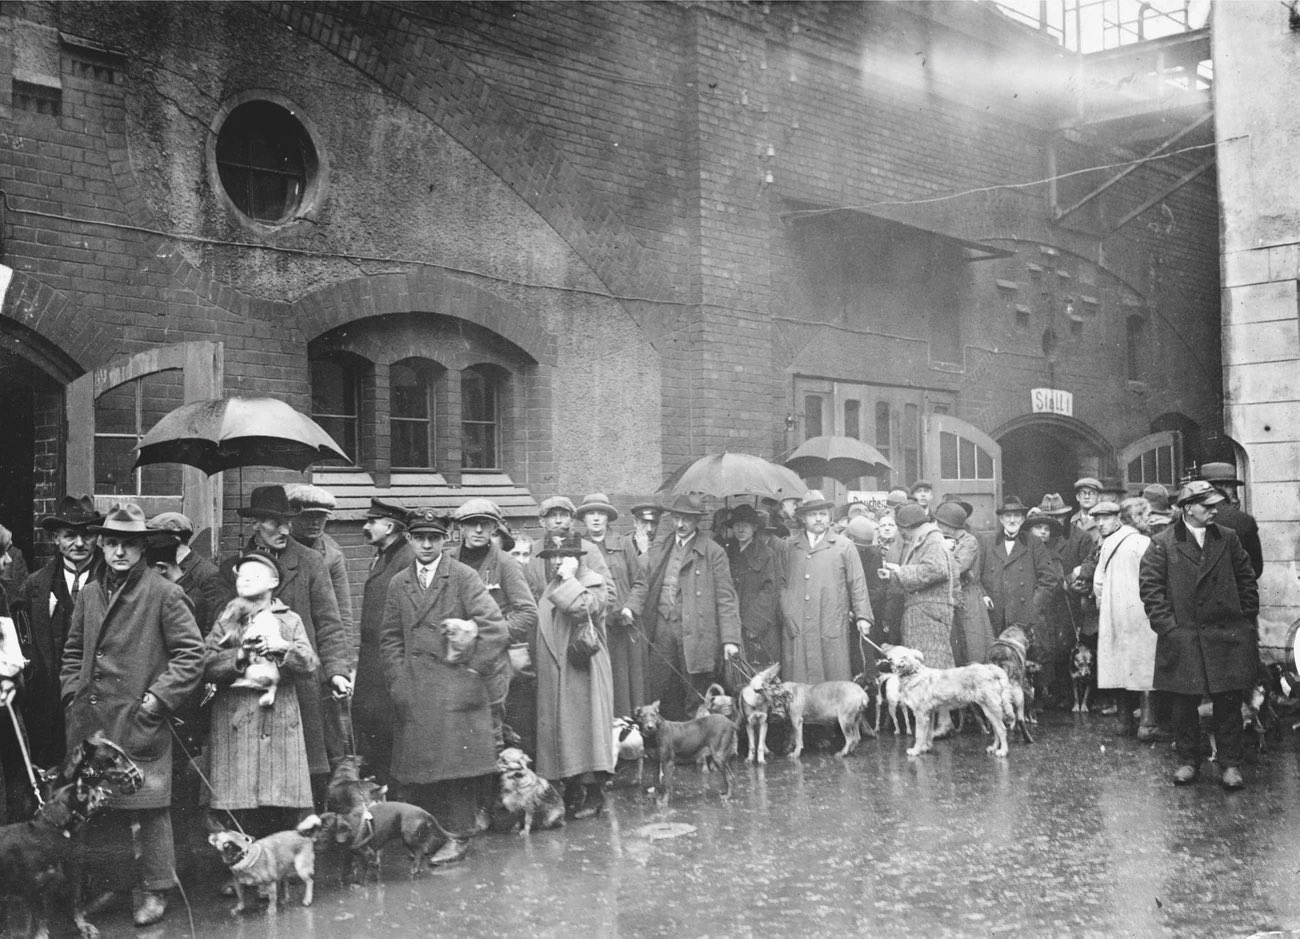 (November 4, 1922) Berlin dog-owners line up to have their pets euthanized due to hyperinflation occurring throughout Weimar Germany. They could not afford to feed their dogs any longer.